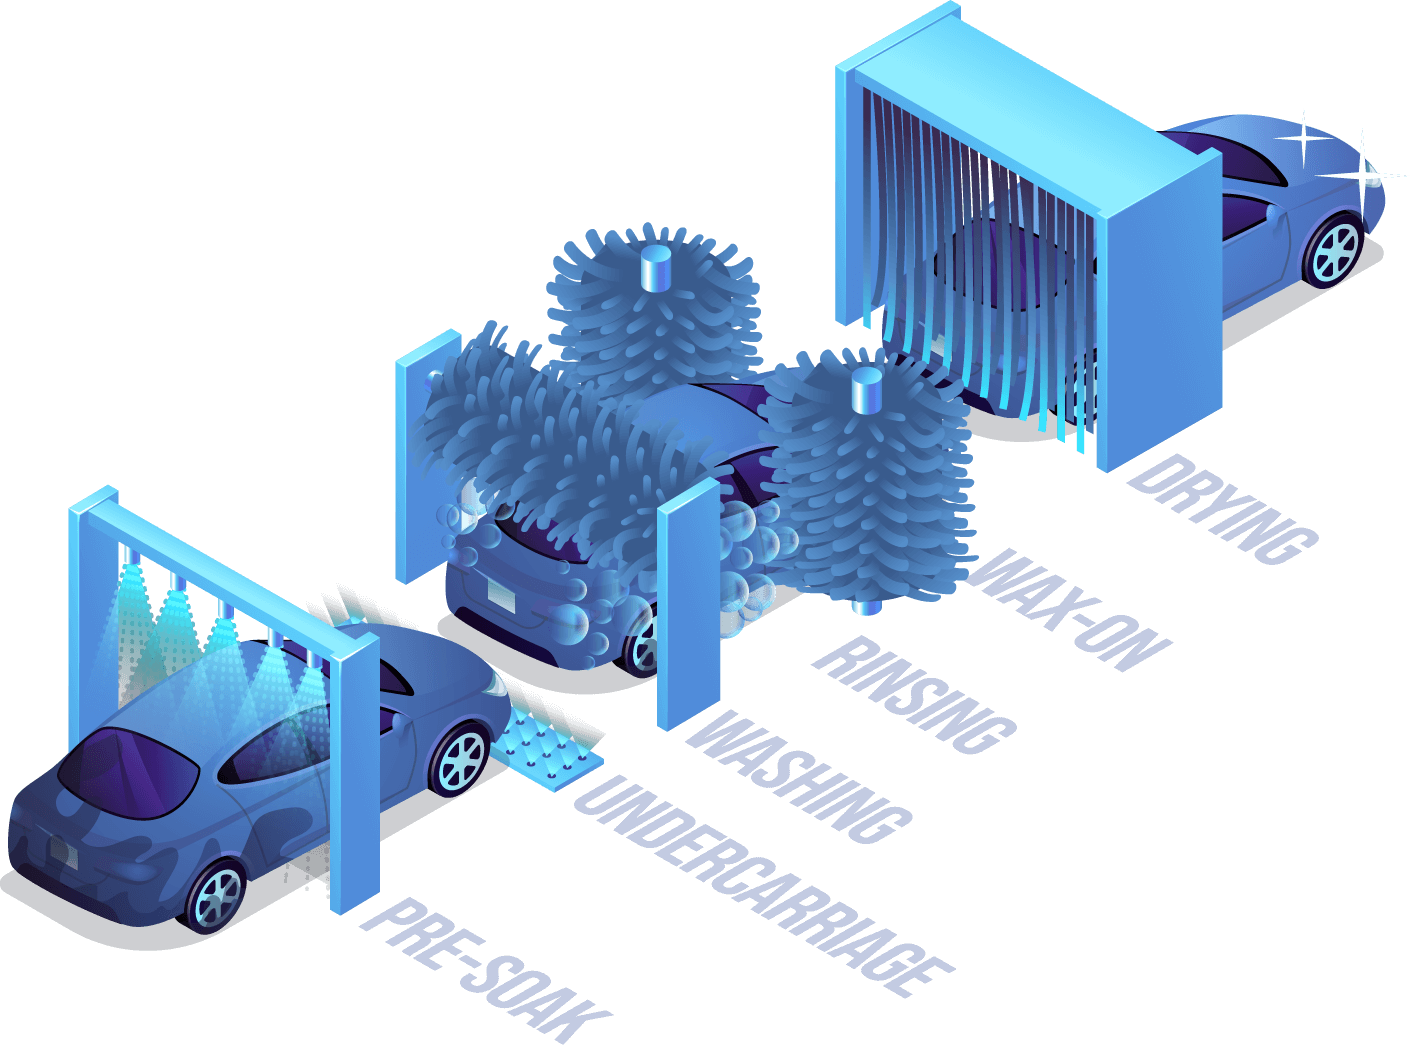 an isometric illustration of a car going through a tunnel car wash featuring each step of the wash including pre-soak, undercarriage, washing, rinsing, wax-on, and drying